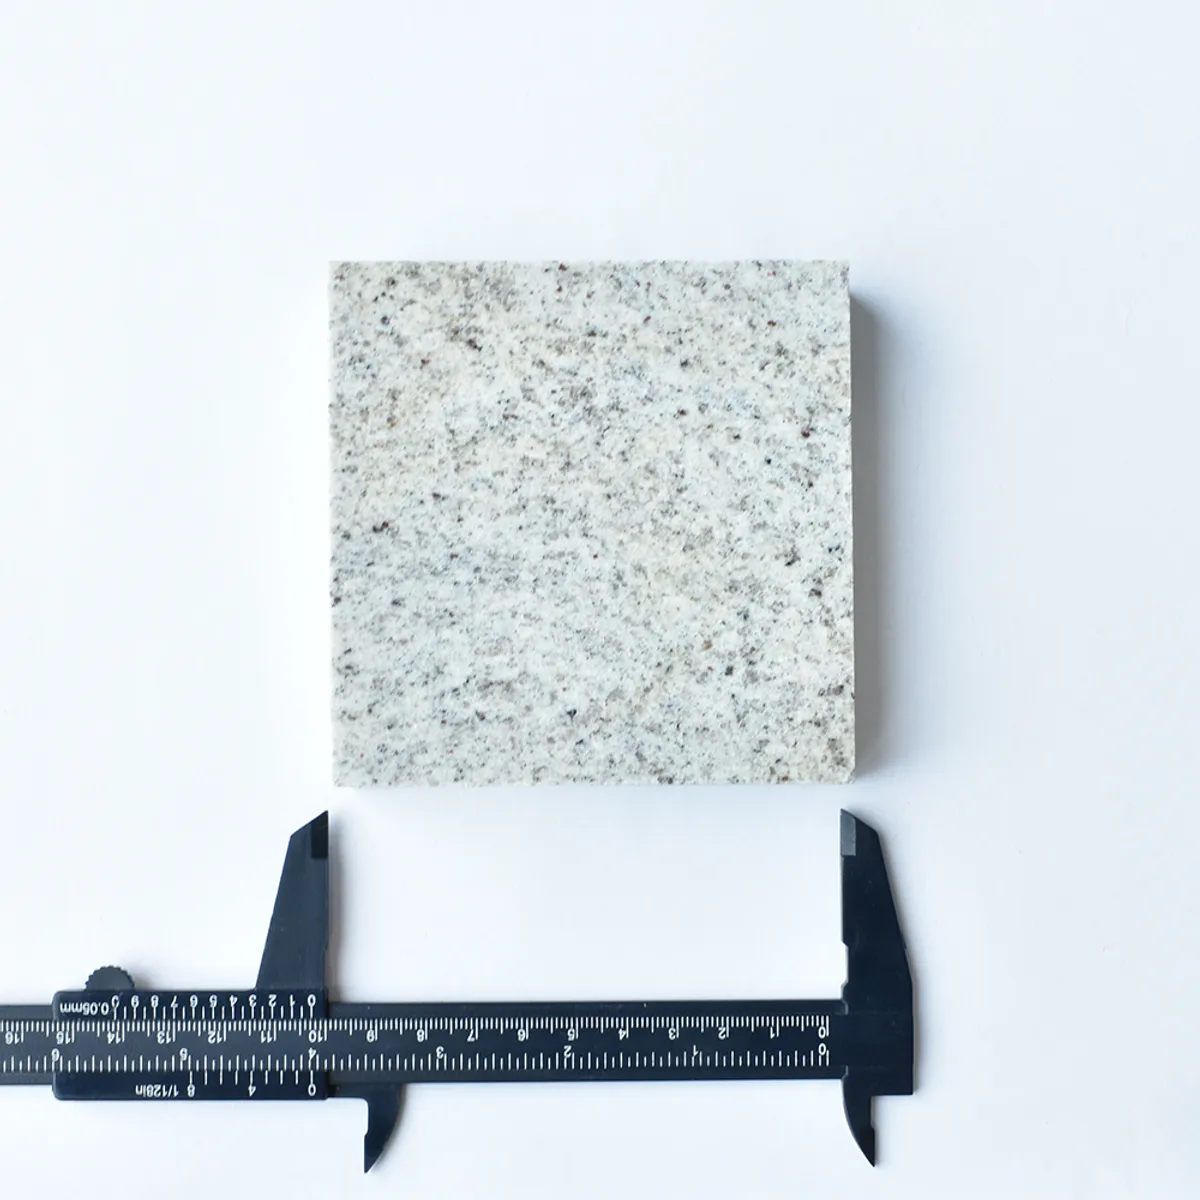 Sample 10Cm Granite Kashmir White Inside Out Contracts